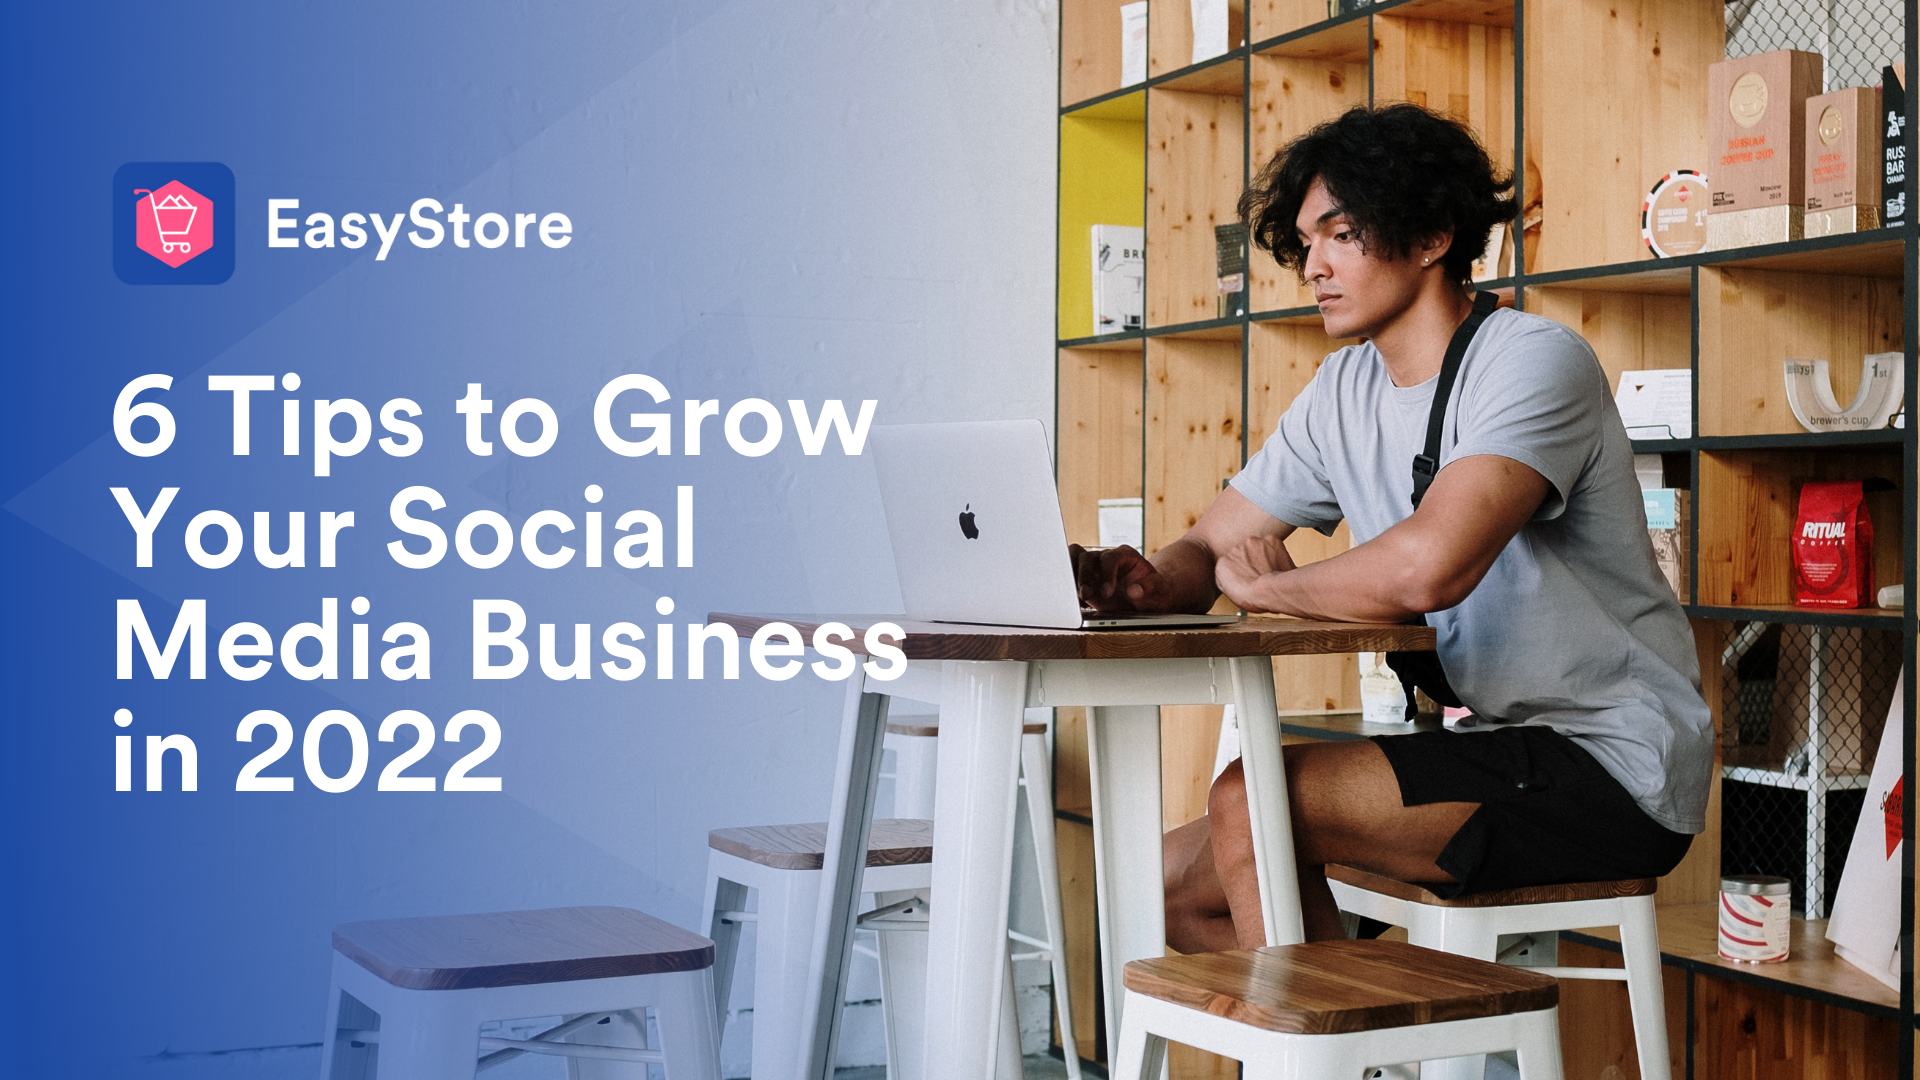 6 Tips to Grow Your Social Media Business in 2022 | EasyStore